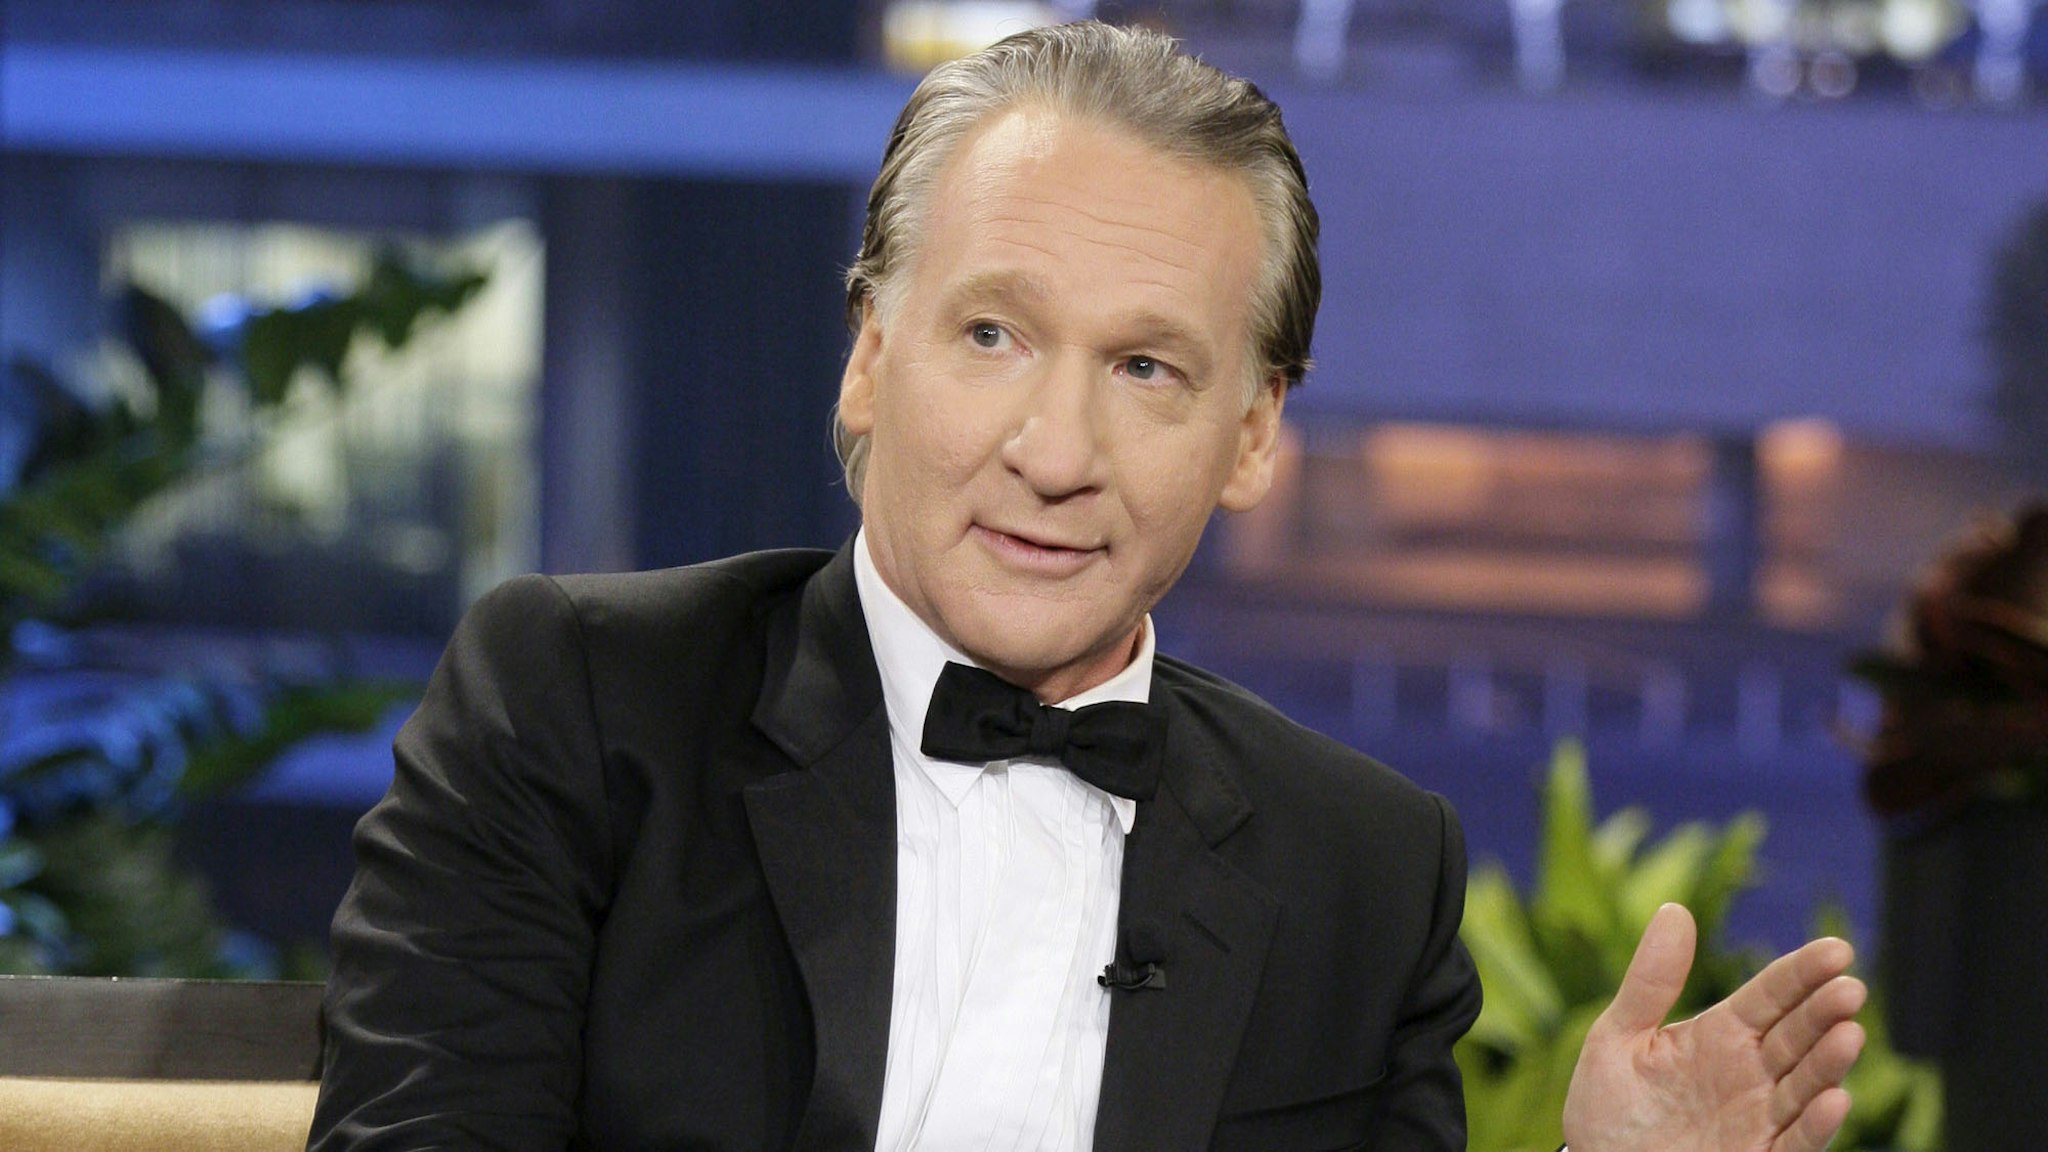 THE TONIGHT SHOW WITH JAY LENO -- Episode 4604 -- Pictured: Comedian Bill Maher during an interview on January 28, 2014